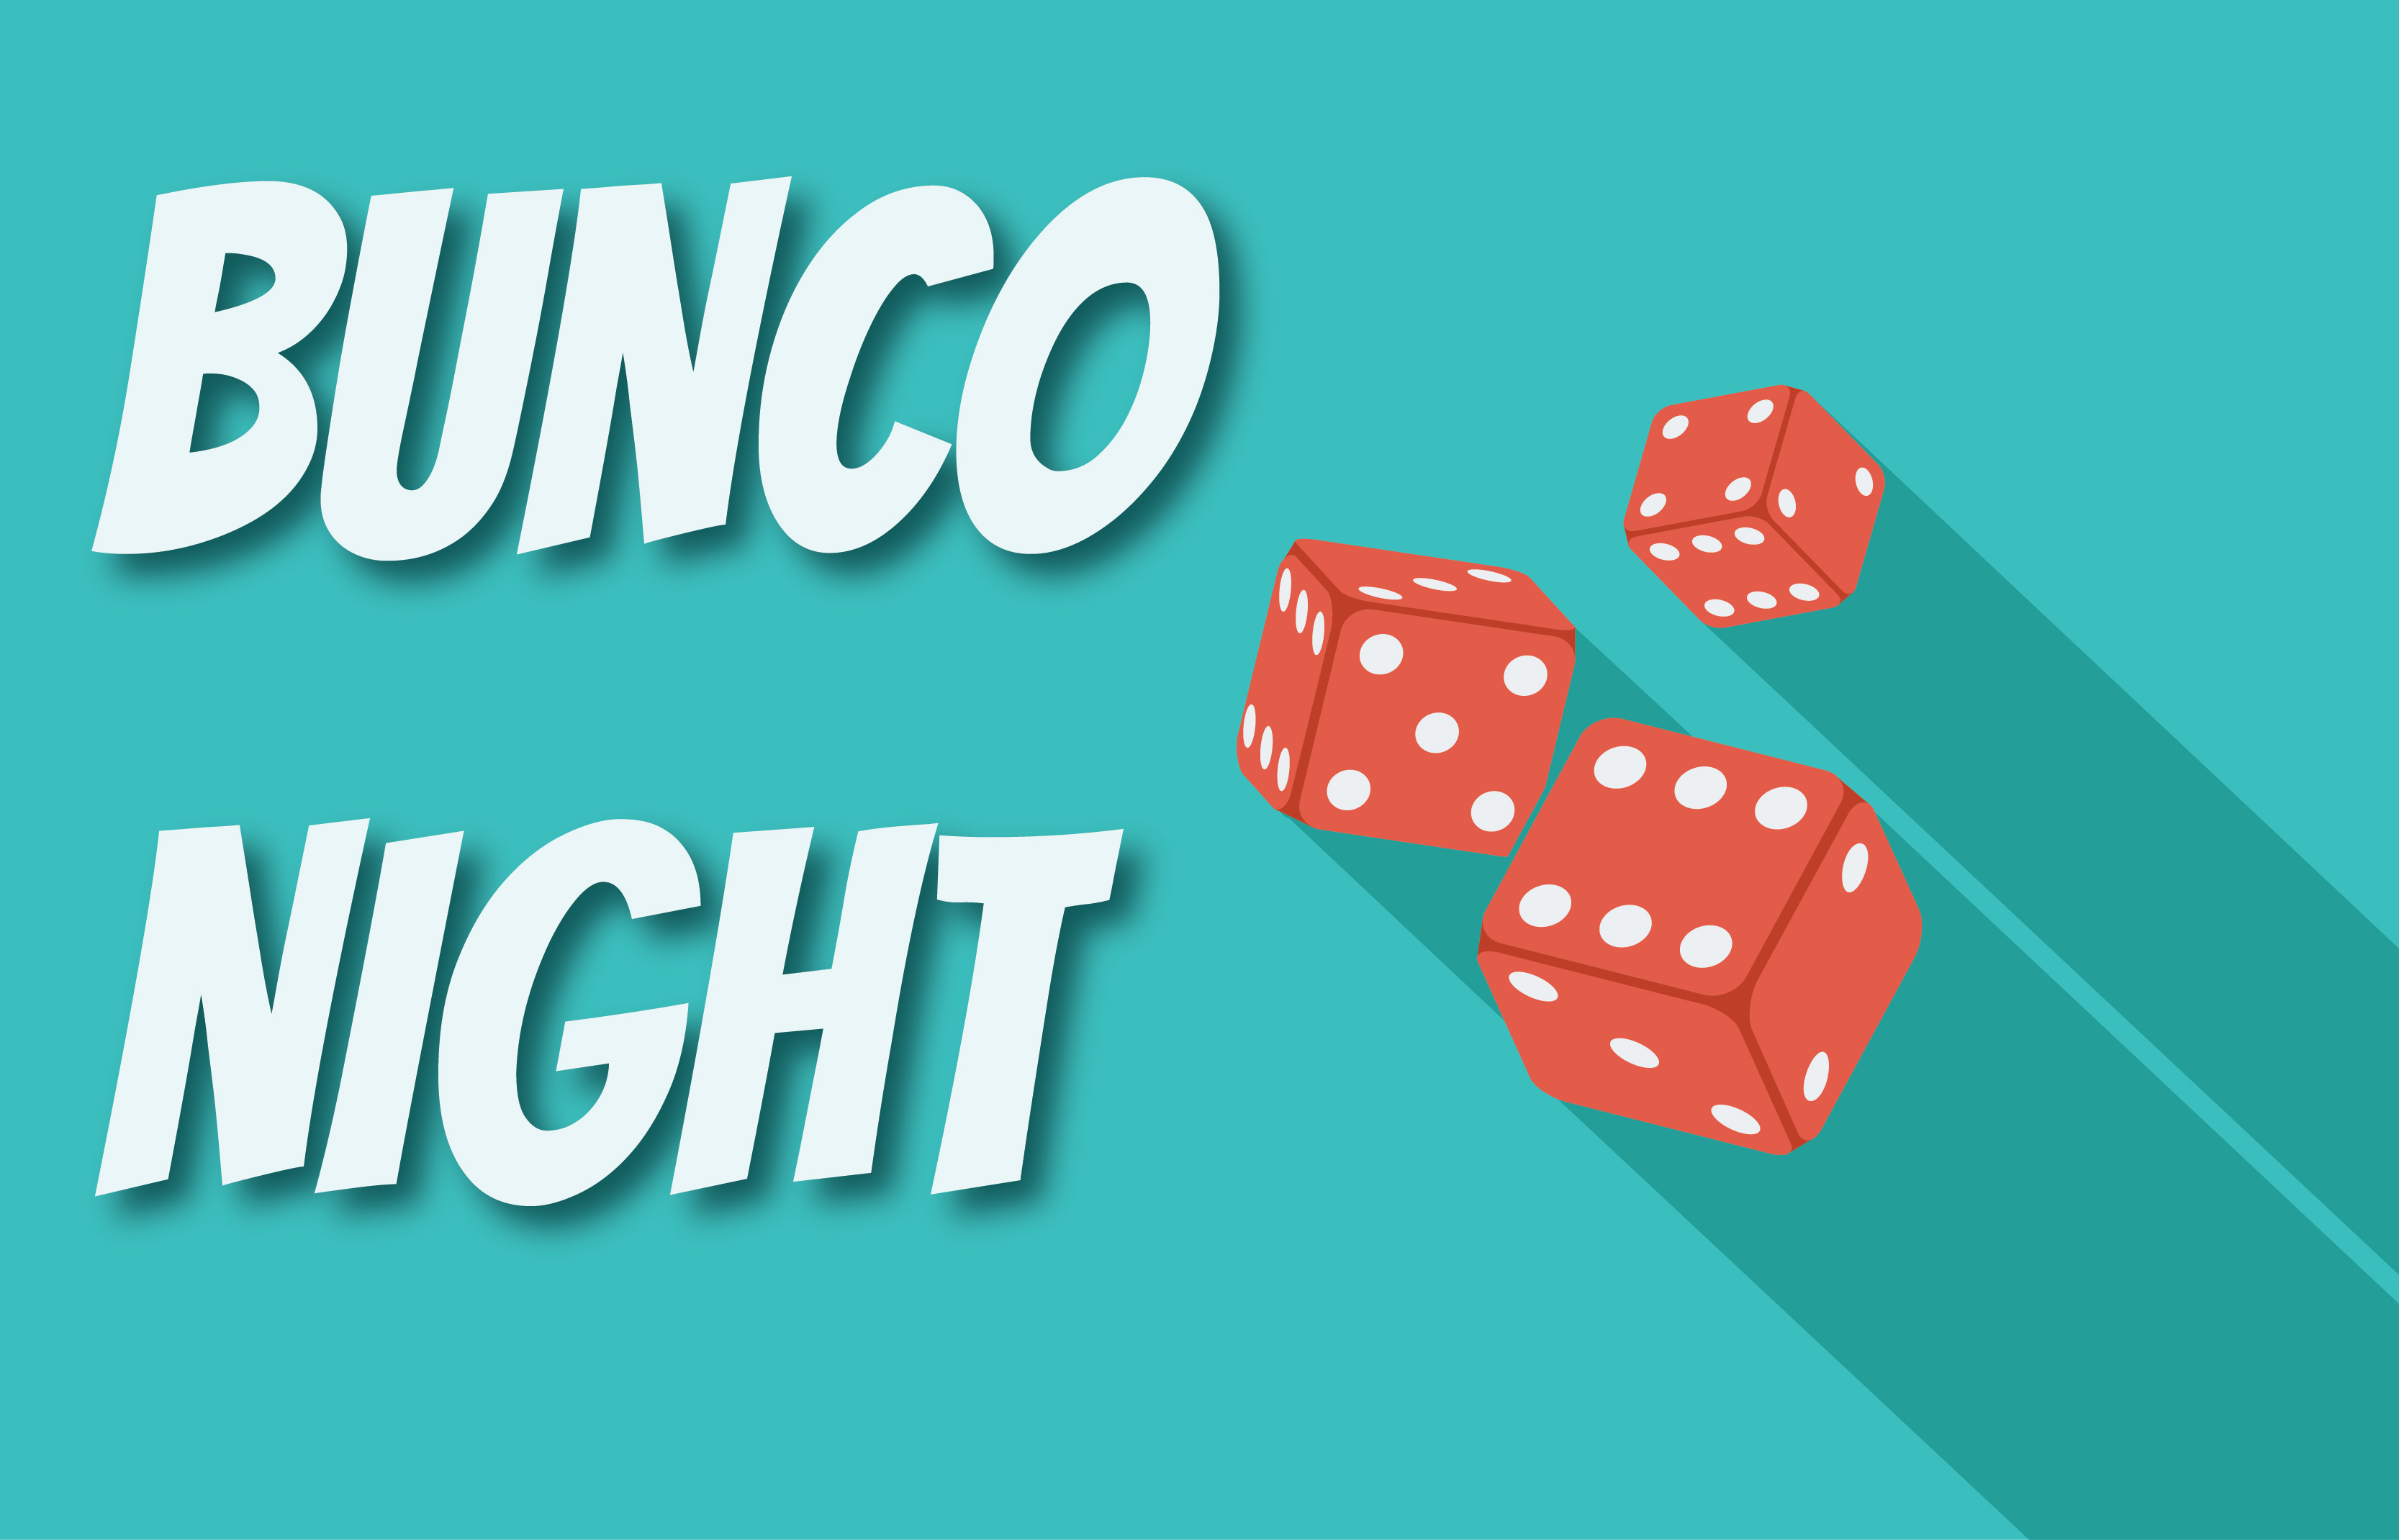 Aberdeen Lucky Lady's Bunco Set for April 18